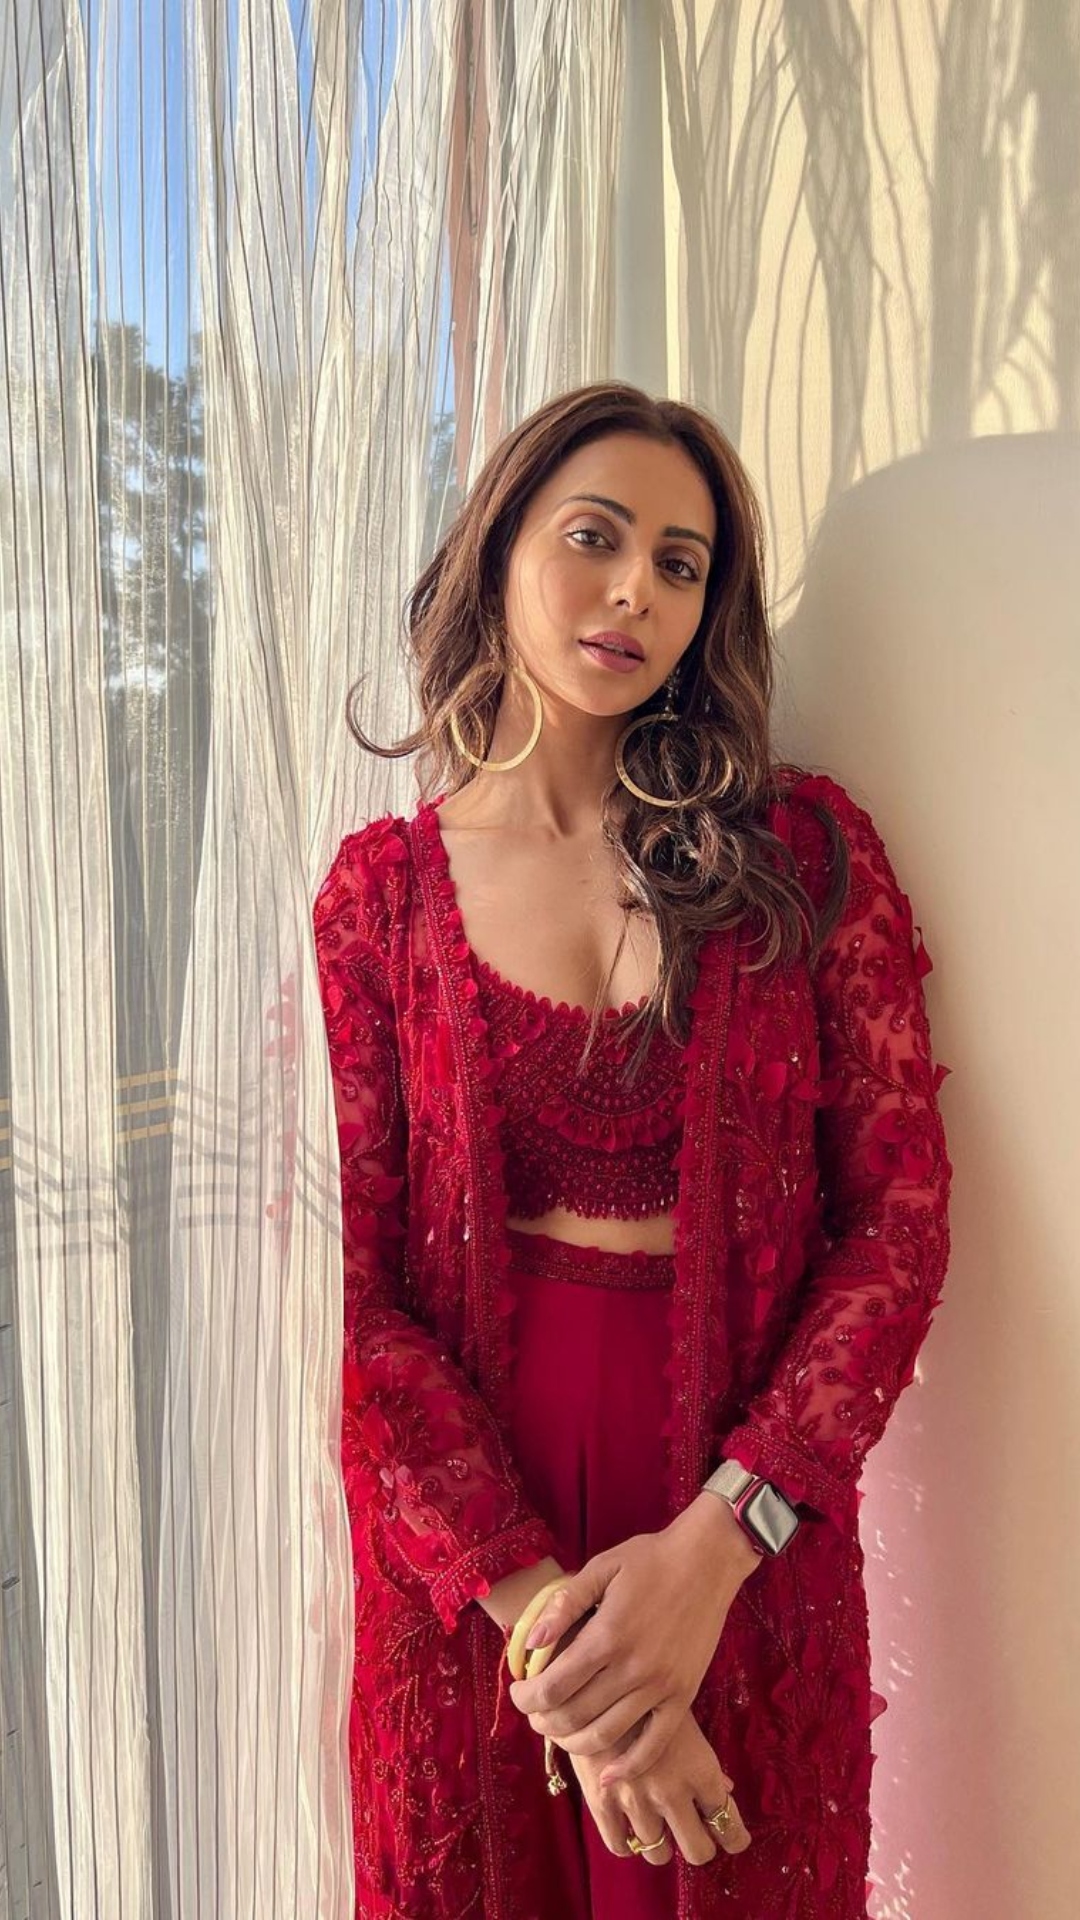 From cardio to planks: Know all about Rakul Preet Singh's daily fitness regime